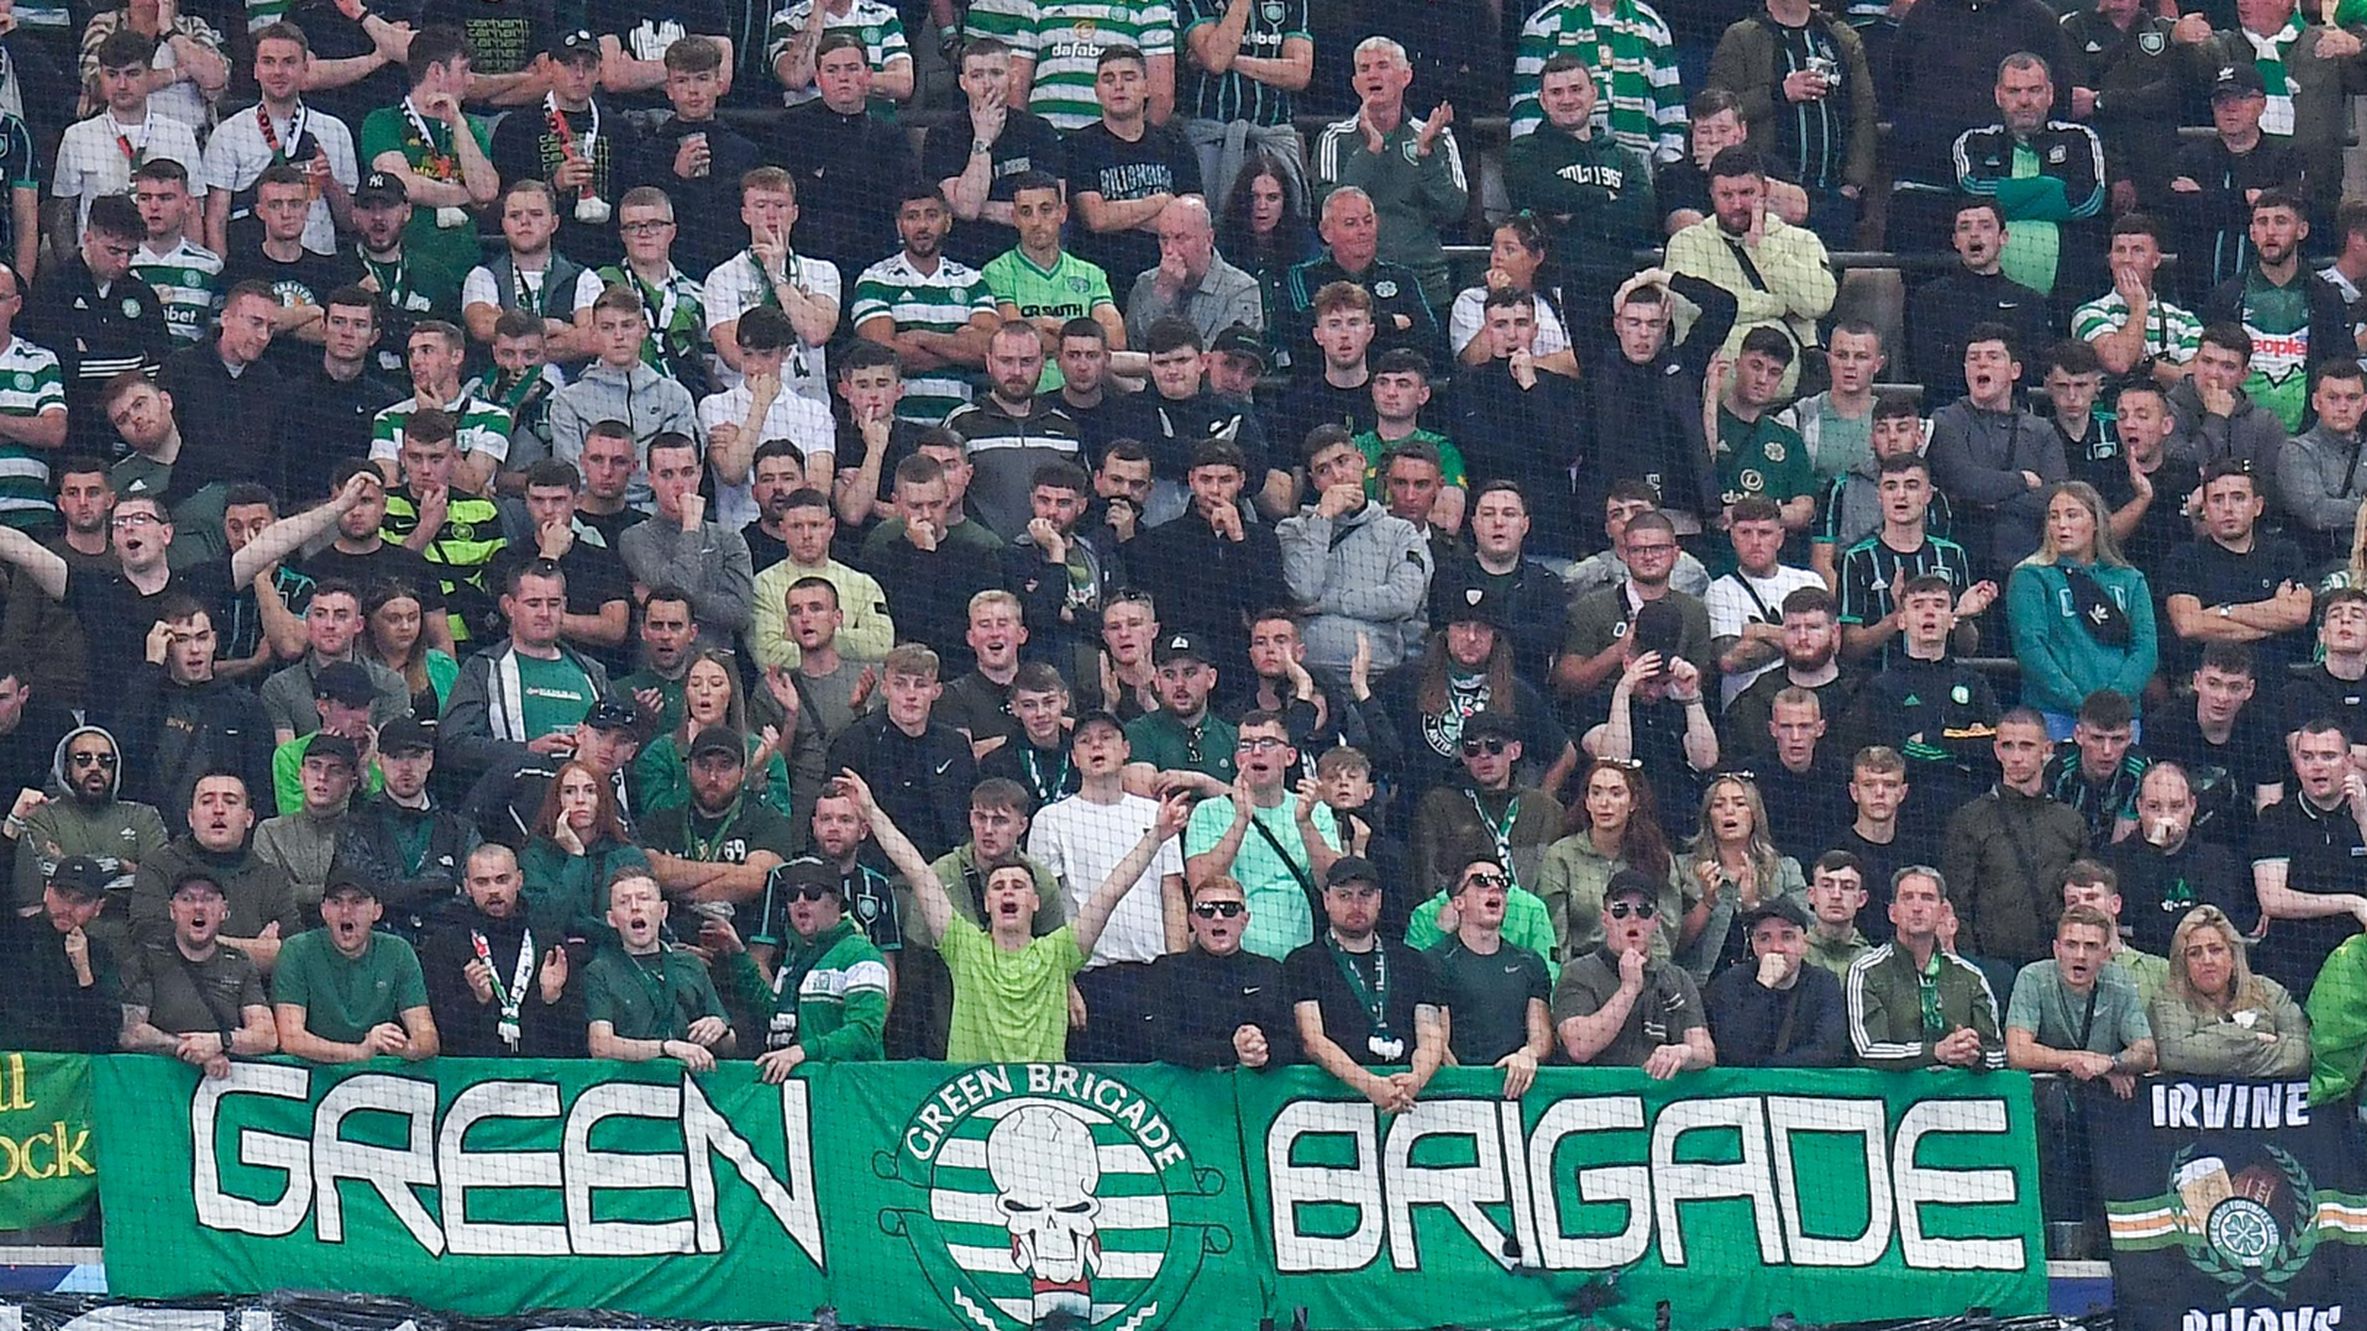 Celtic fans under fire for anti-royal banner as UEFA set to investigate Rangers